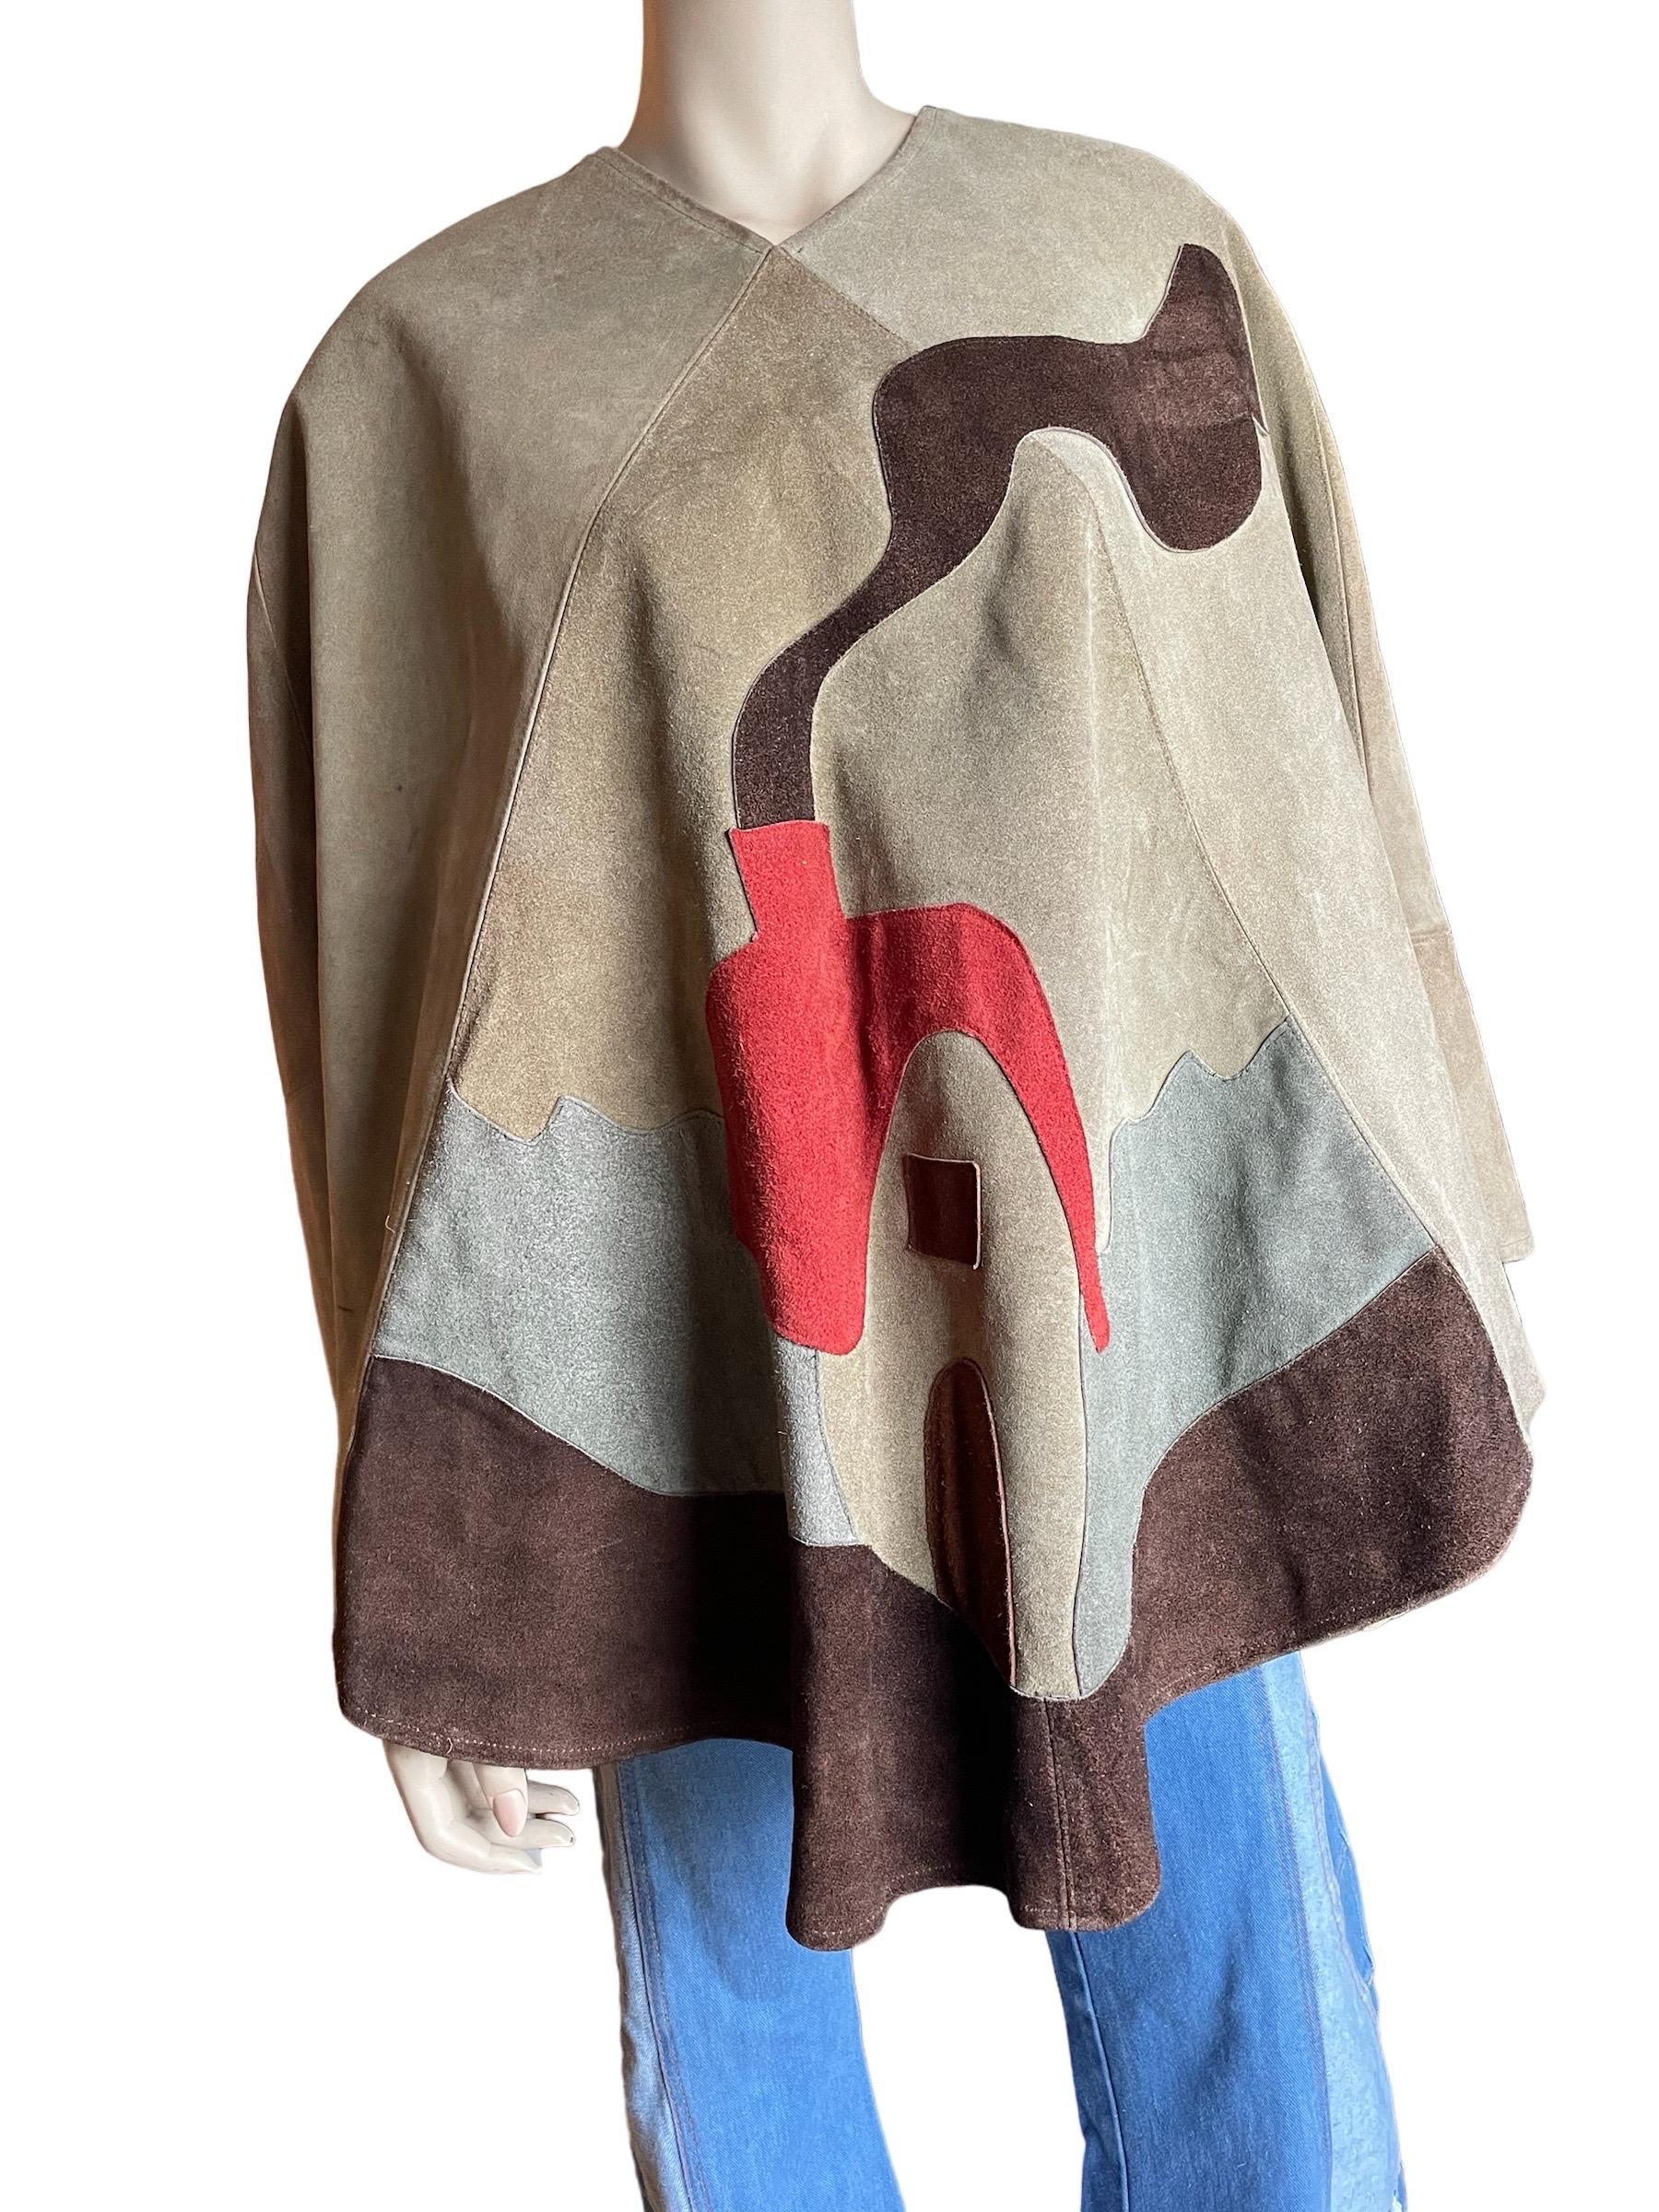 1970s Suede Patchwork Poncho 

Amazing 1970s suede patchwork poncho with smokey house scene. A one of a kind piece from the 70s. Amazing patchwork in the design of a mystical house with a smokey chimney. Slight distress on the back seam and small